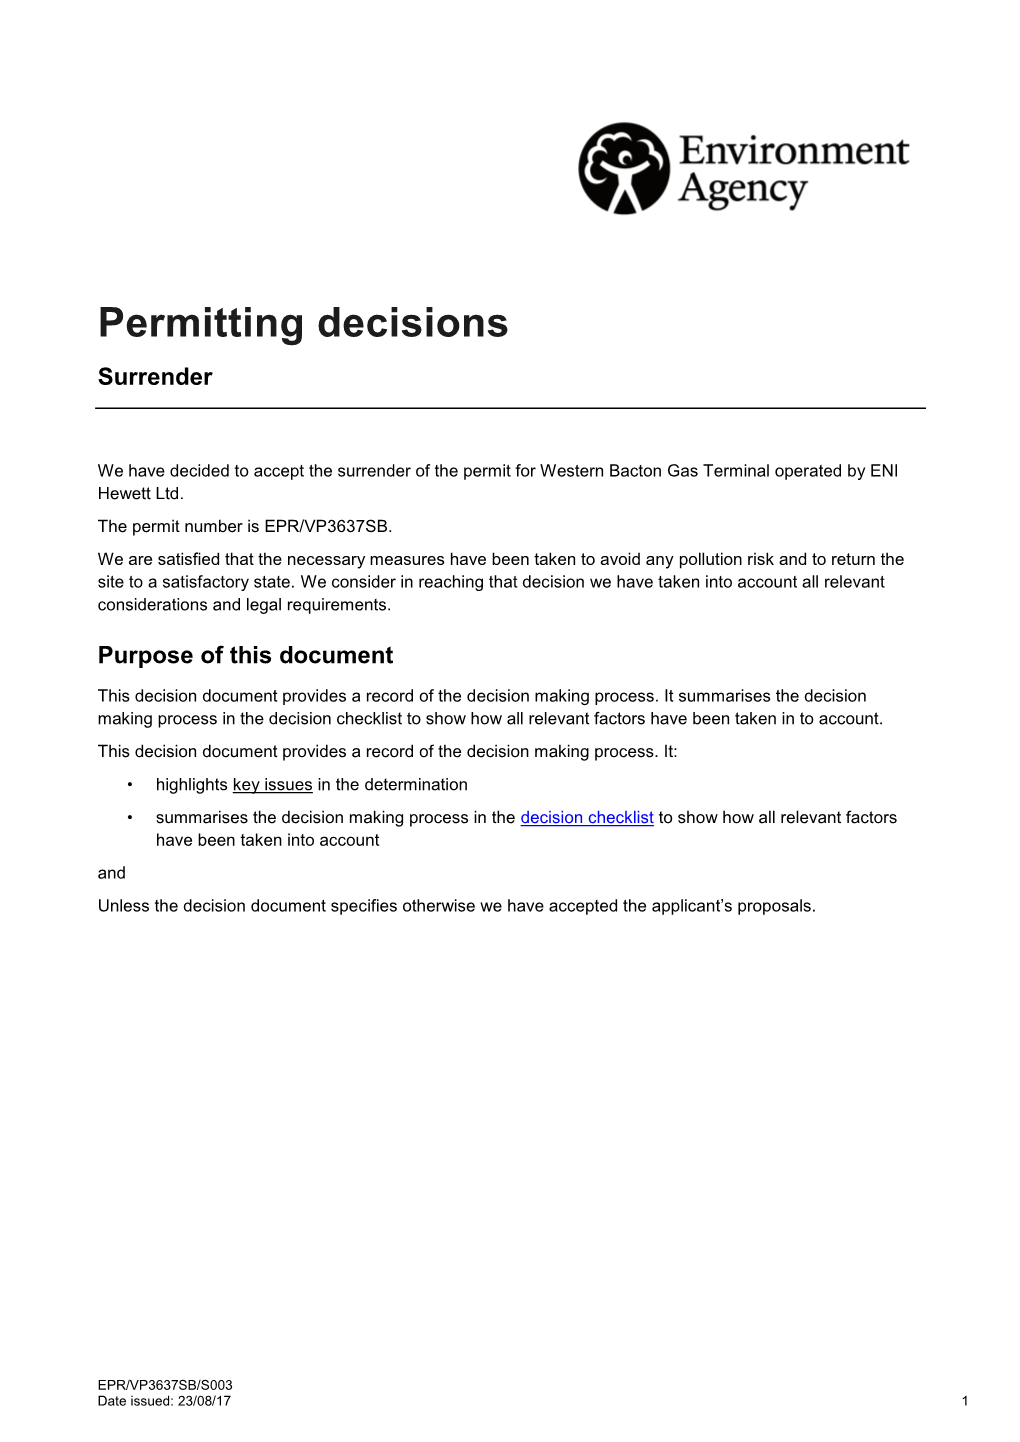 Decision Document Provides a Record of the Decision Making Process